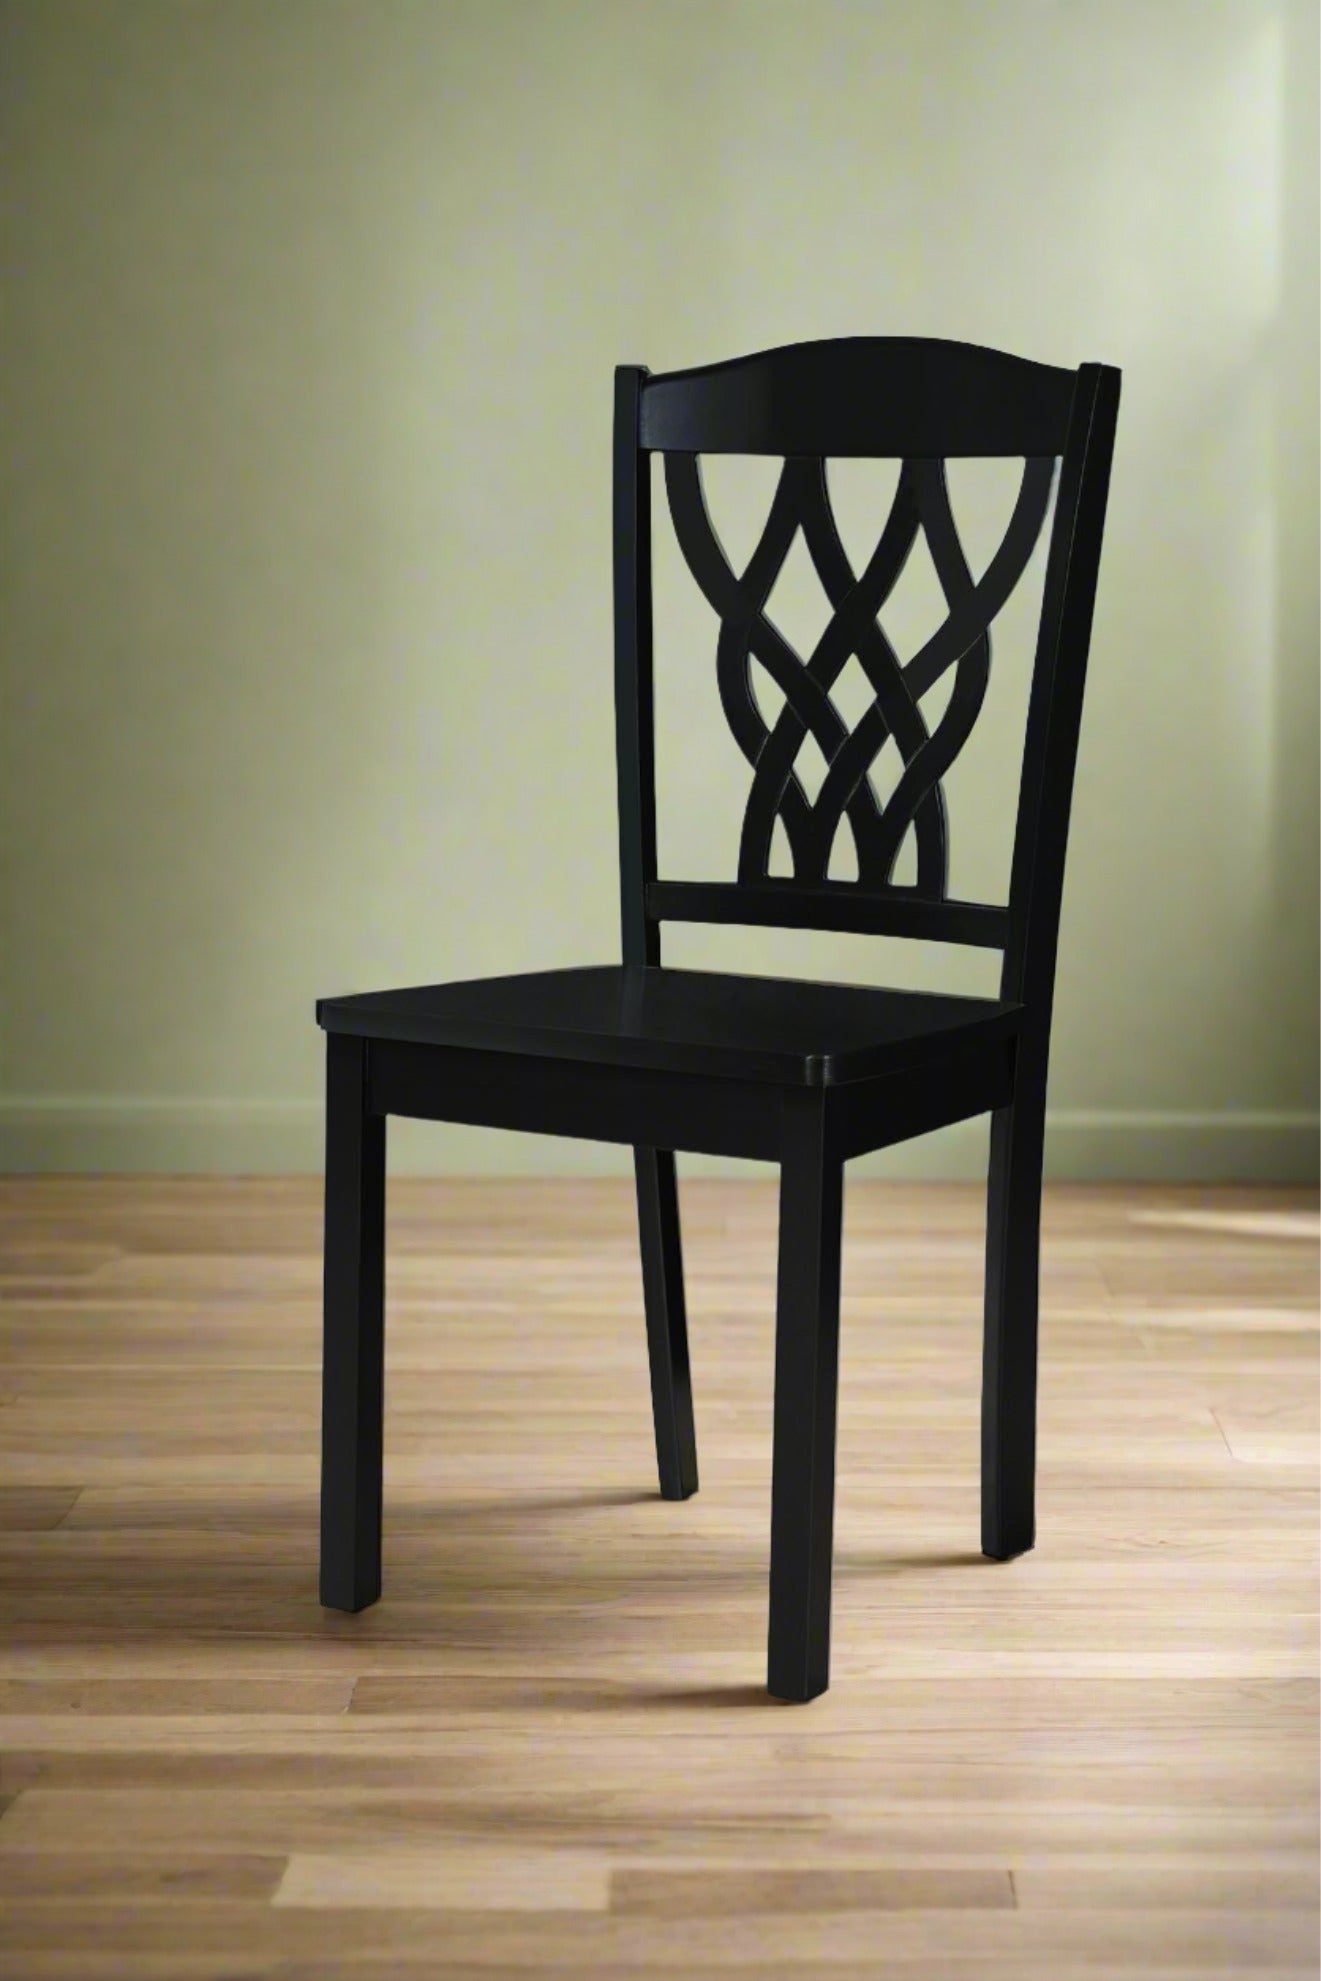 Dreamweaver Dining Chair - Antique-inspired wooden chair with unique patterned backrest - The A2Z Furniture